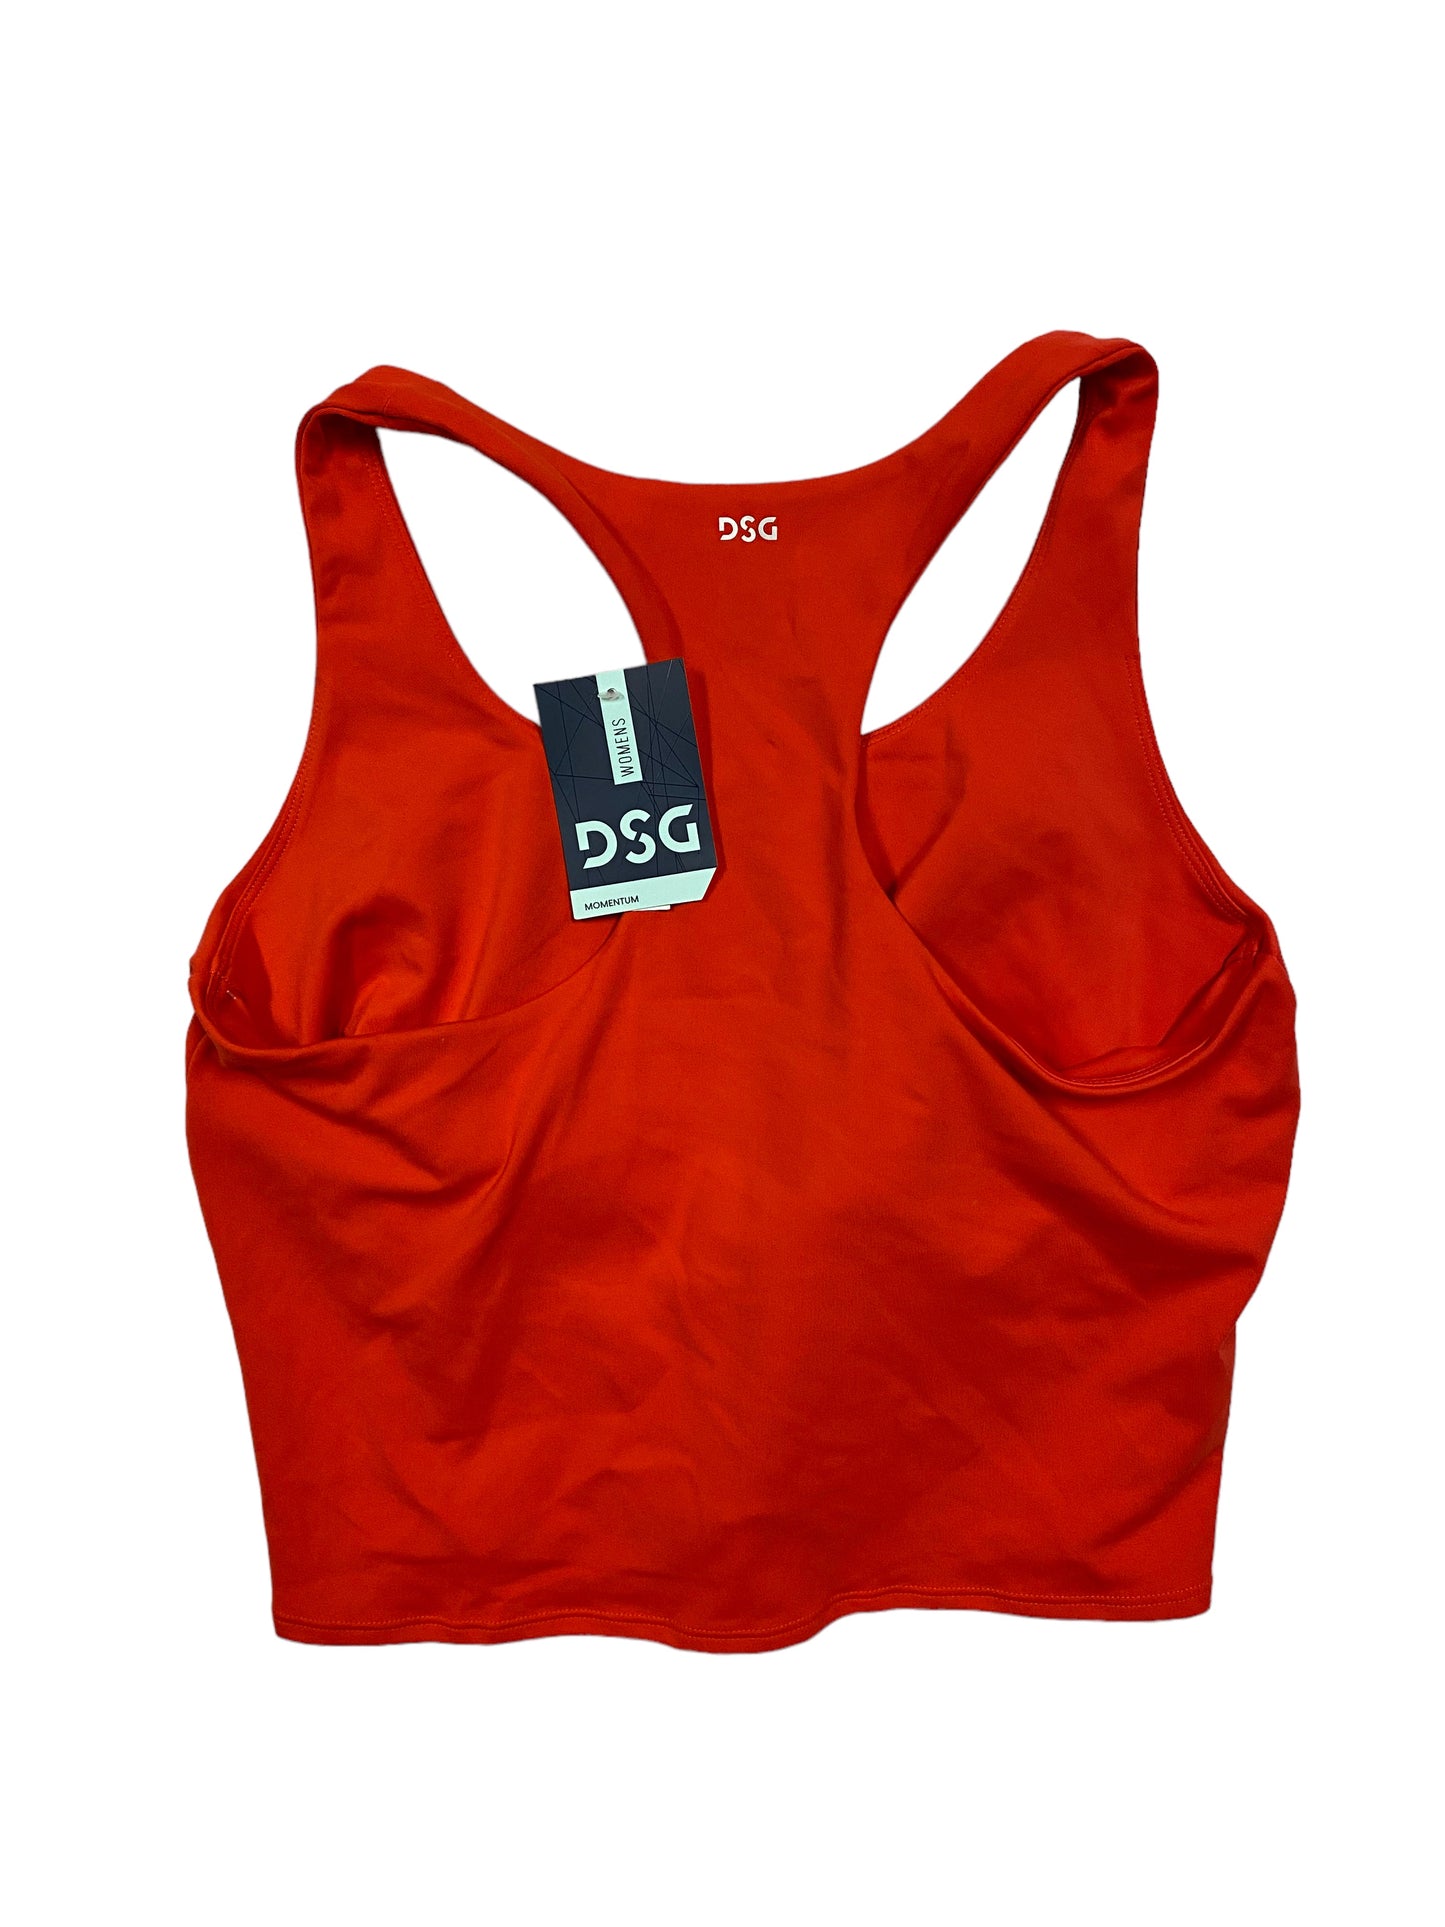 Red Athletic Tank Top Dsg Outerwear, Size L